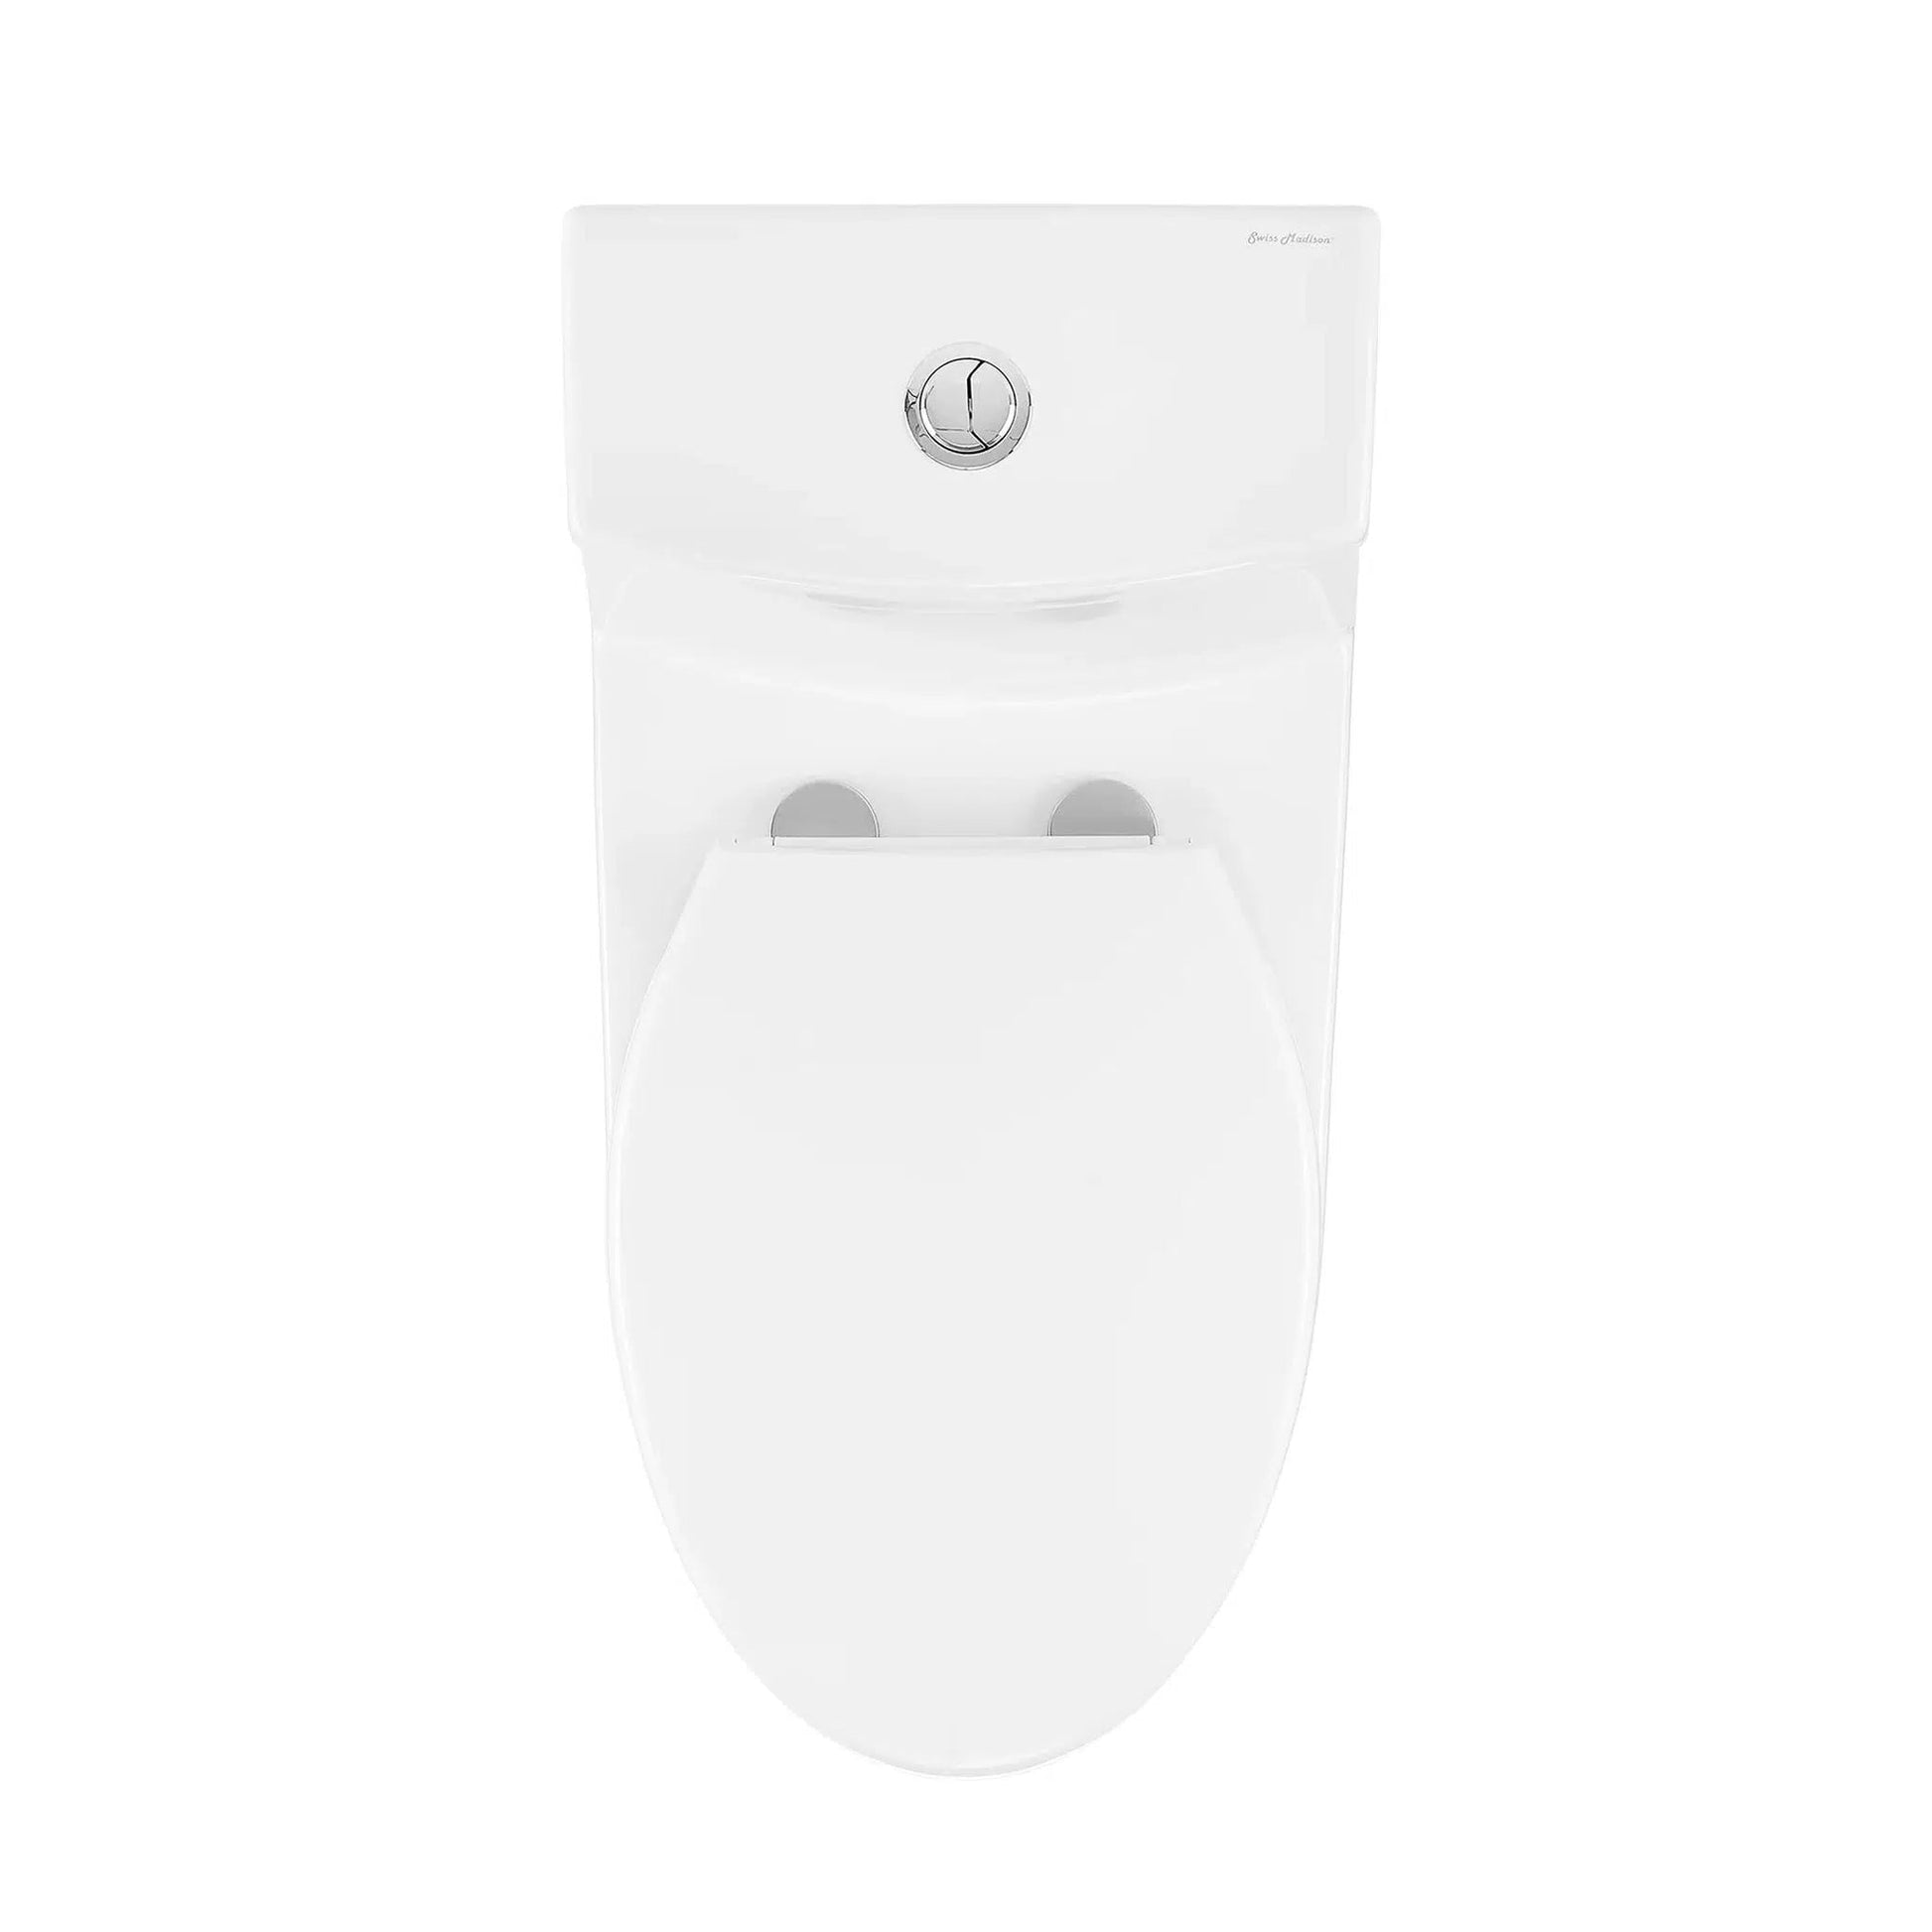 Swiss Madison Virage 15" x 28" White One-Piece Elongated Floor Mounted Toilet With 1.1/1.6 GPF Vortex™ Dual-Flush Function